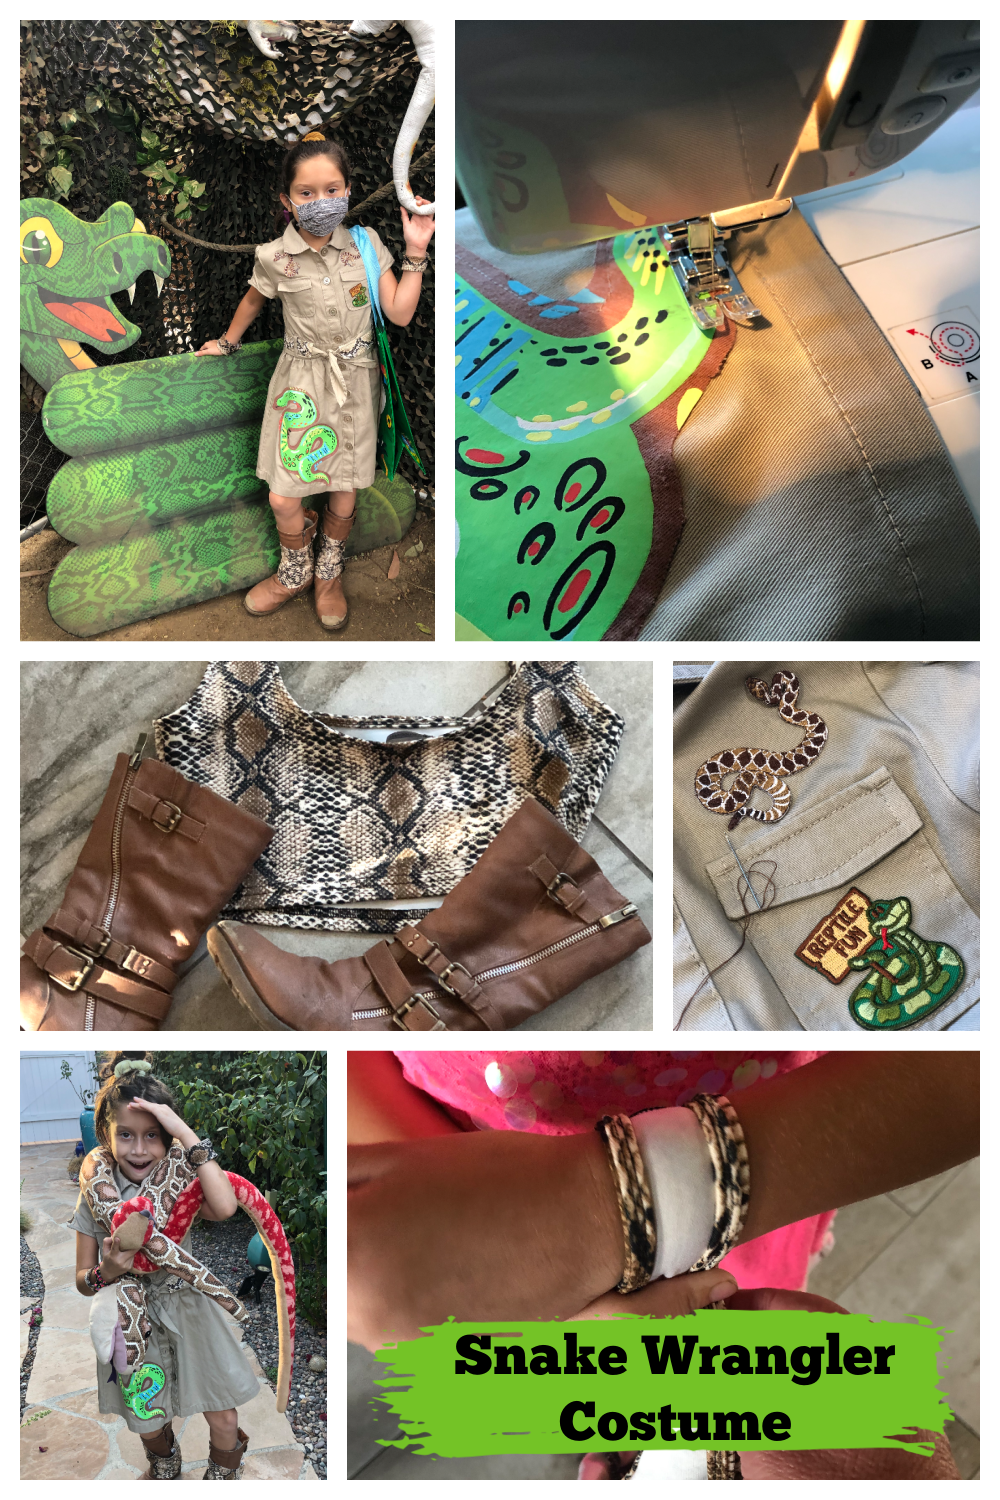 How to Make a Snake Wrangler Costume + Sewing Tips for Cosplay Fabrics -  CATHIE FILIAN's Handmade Happy Hour